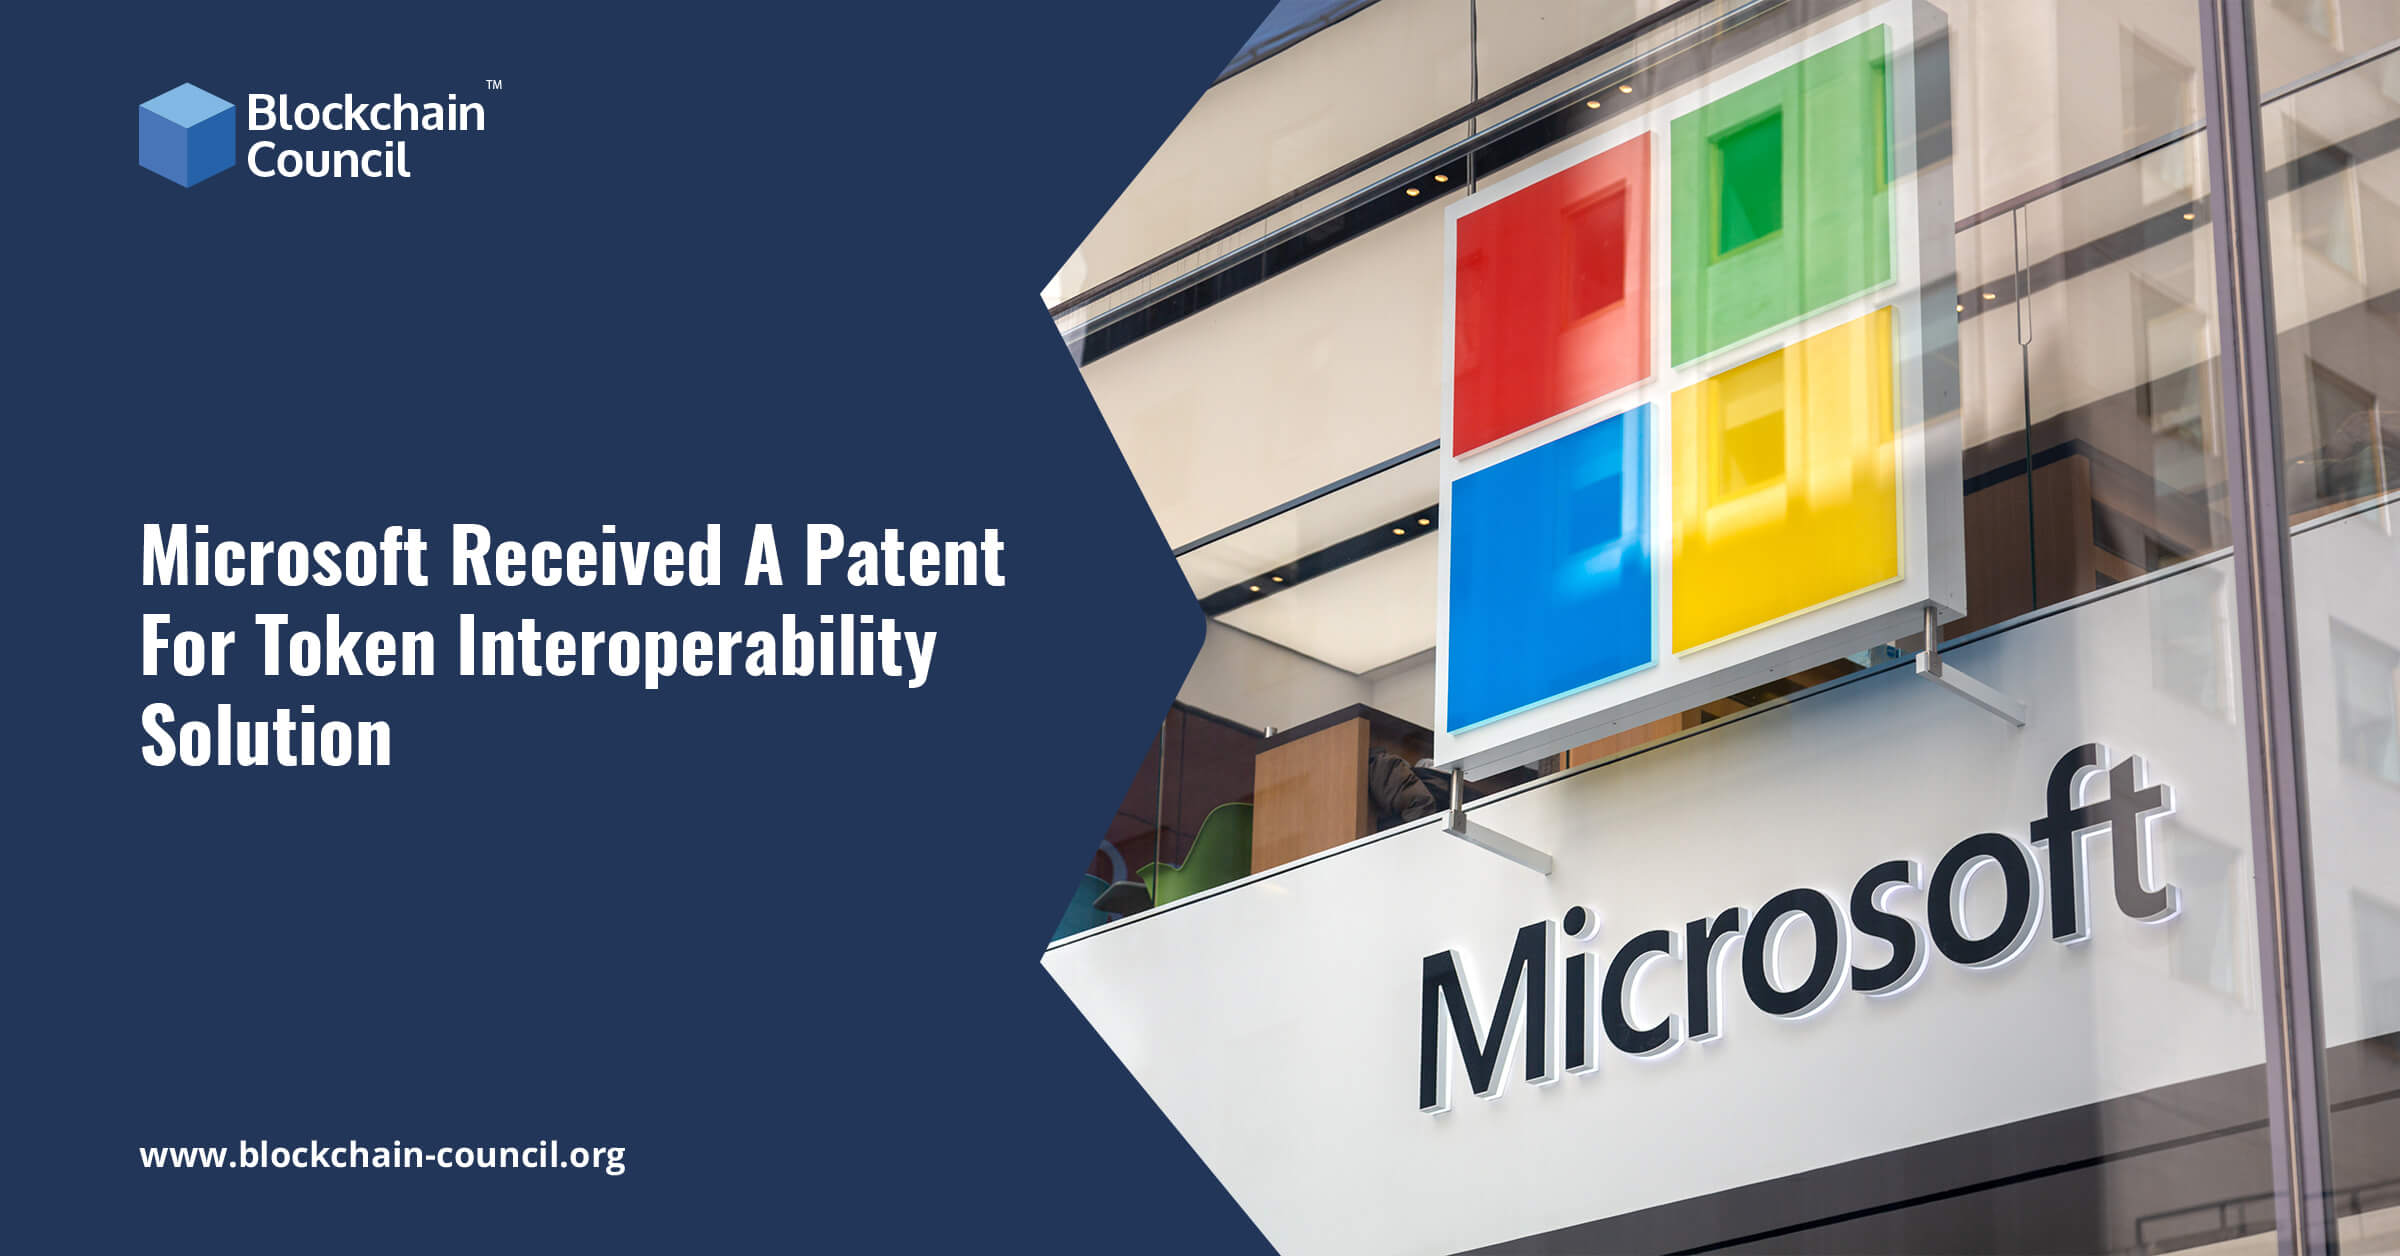 Microsoft Received A Patent For Token Interoperability Solution